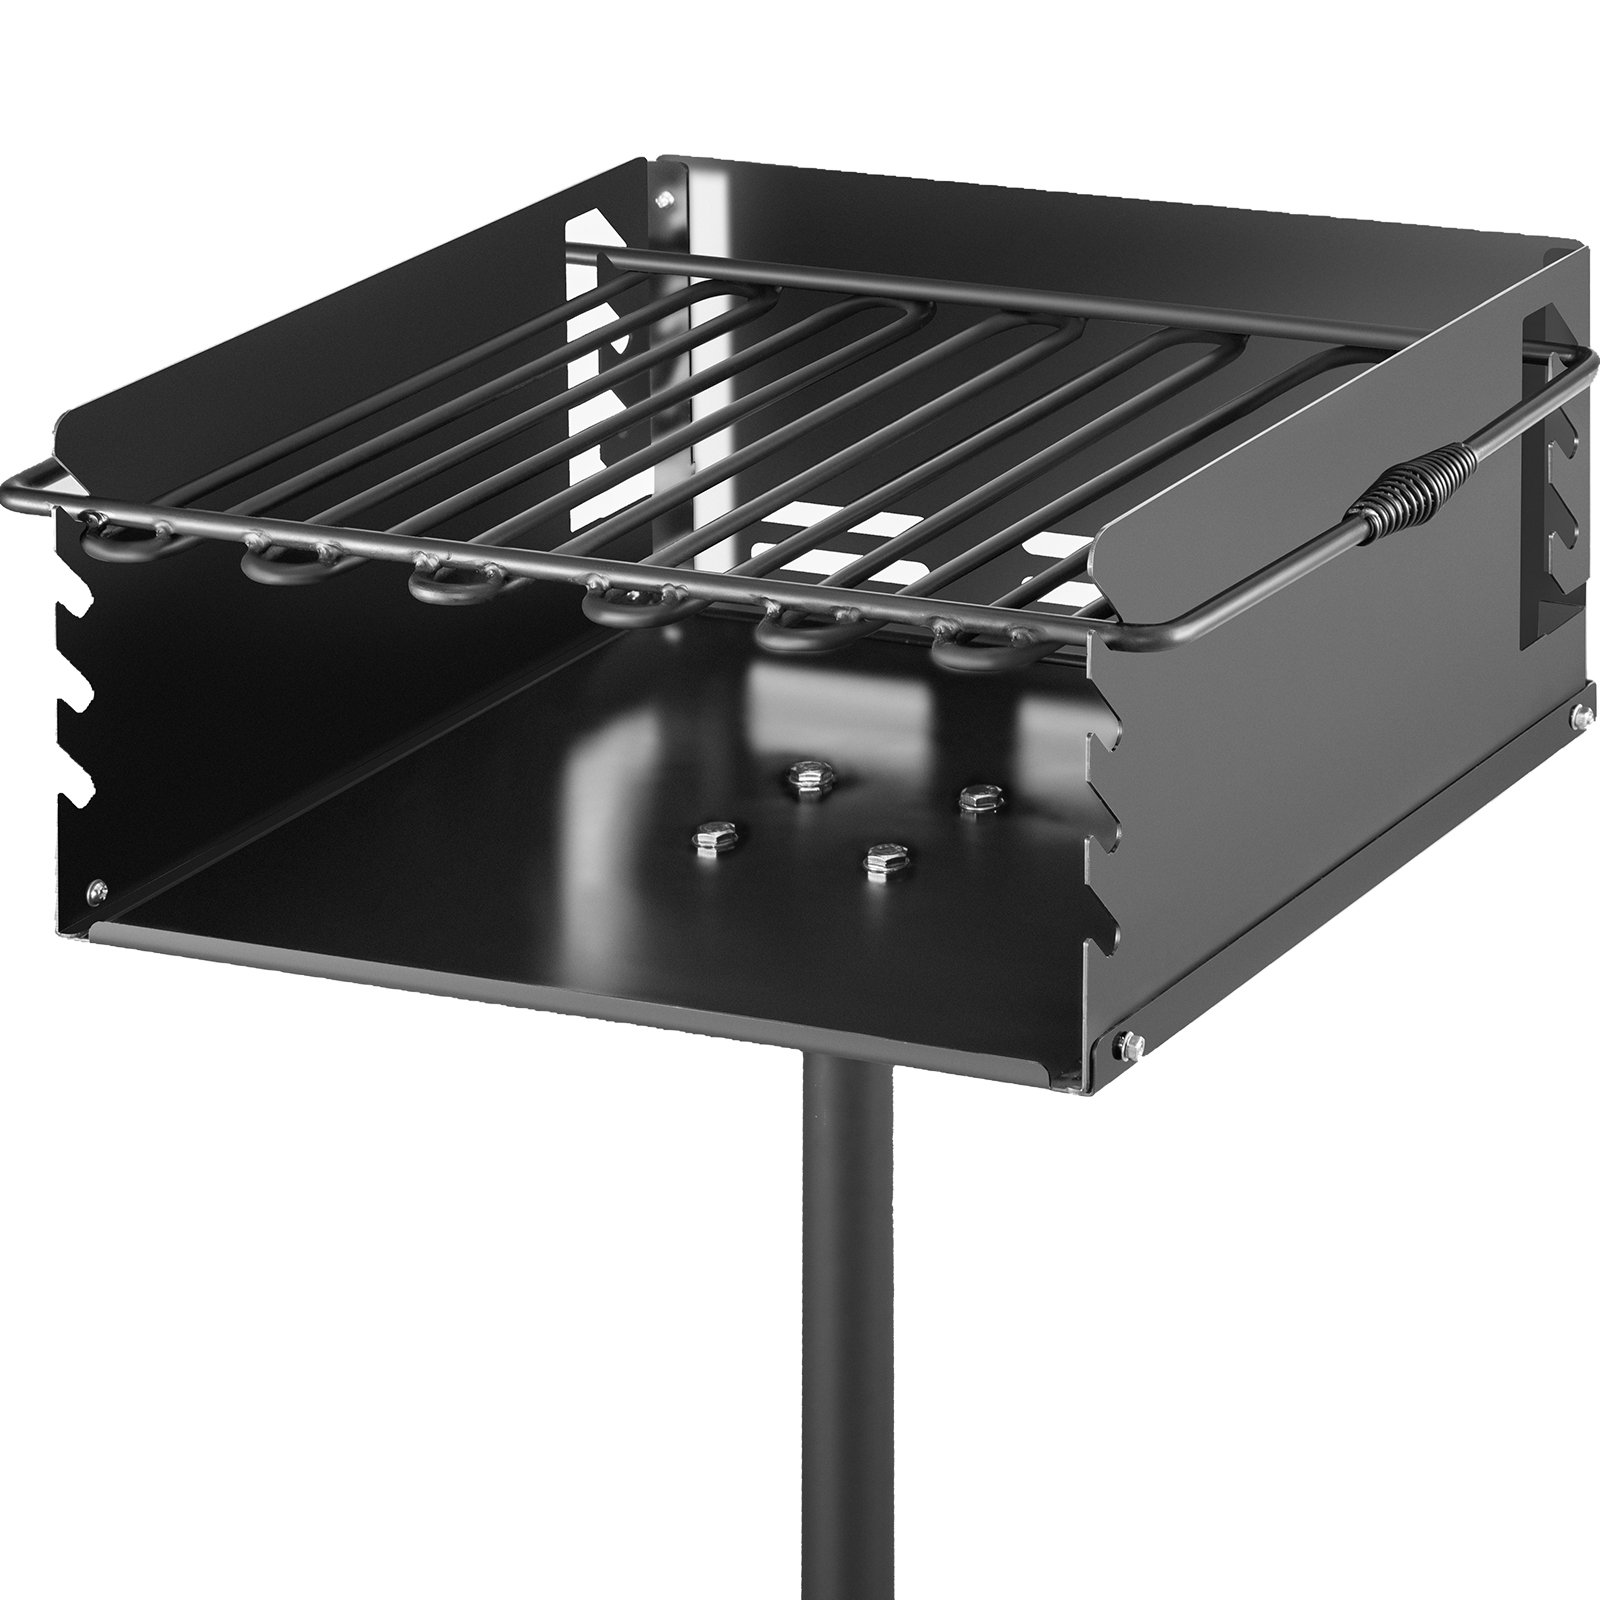 Heavy-Duty Park Style Grill Large Charcoal Bbq Outdoor Cooking w/Grill ...